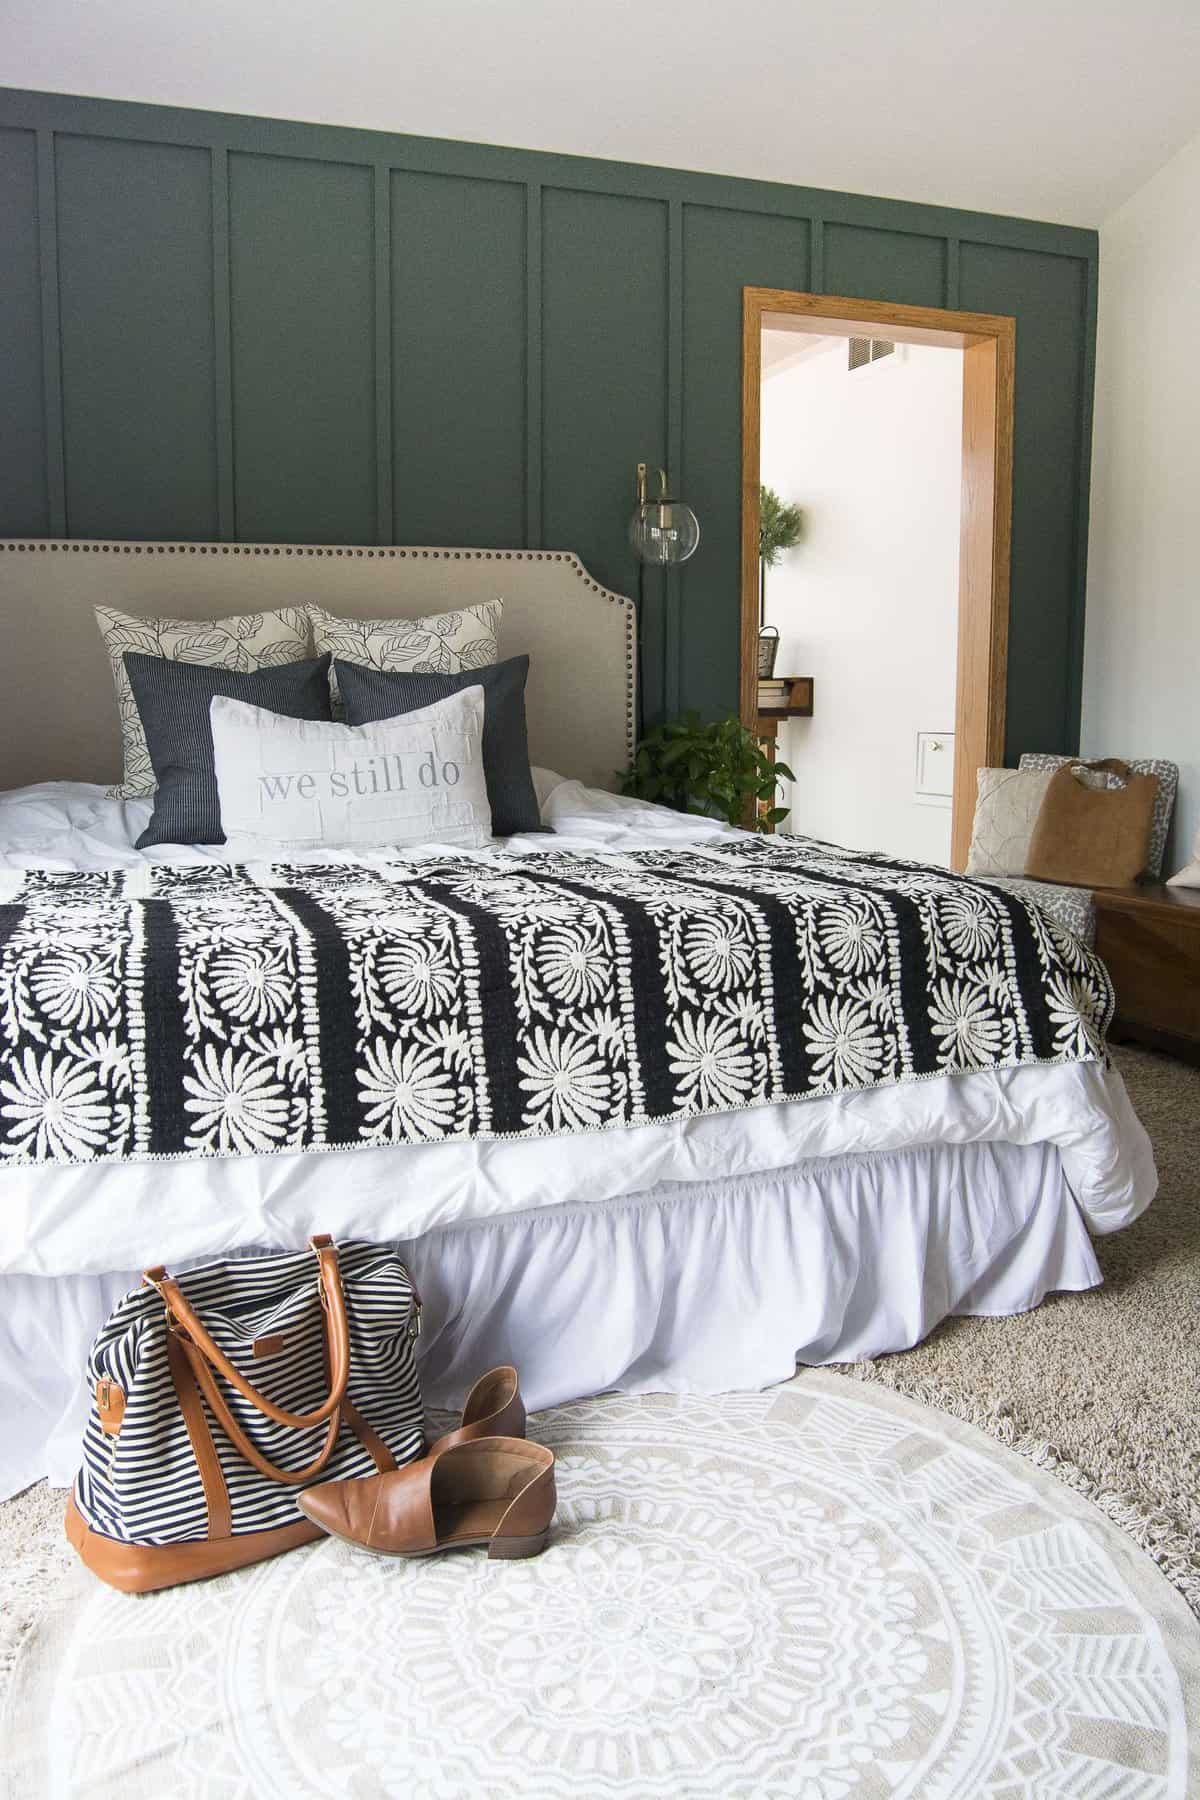 A master bedroom needs to have a few finishing touches to make it a cozy retreat! Today I'm showcasing how just a few additions can turn a bland bedroom into an oasis with modern farmhouse bedroom decor. Head to the blog to read more!